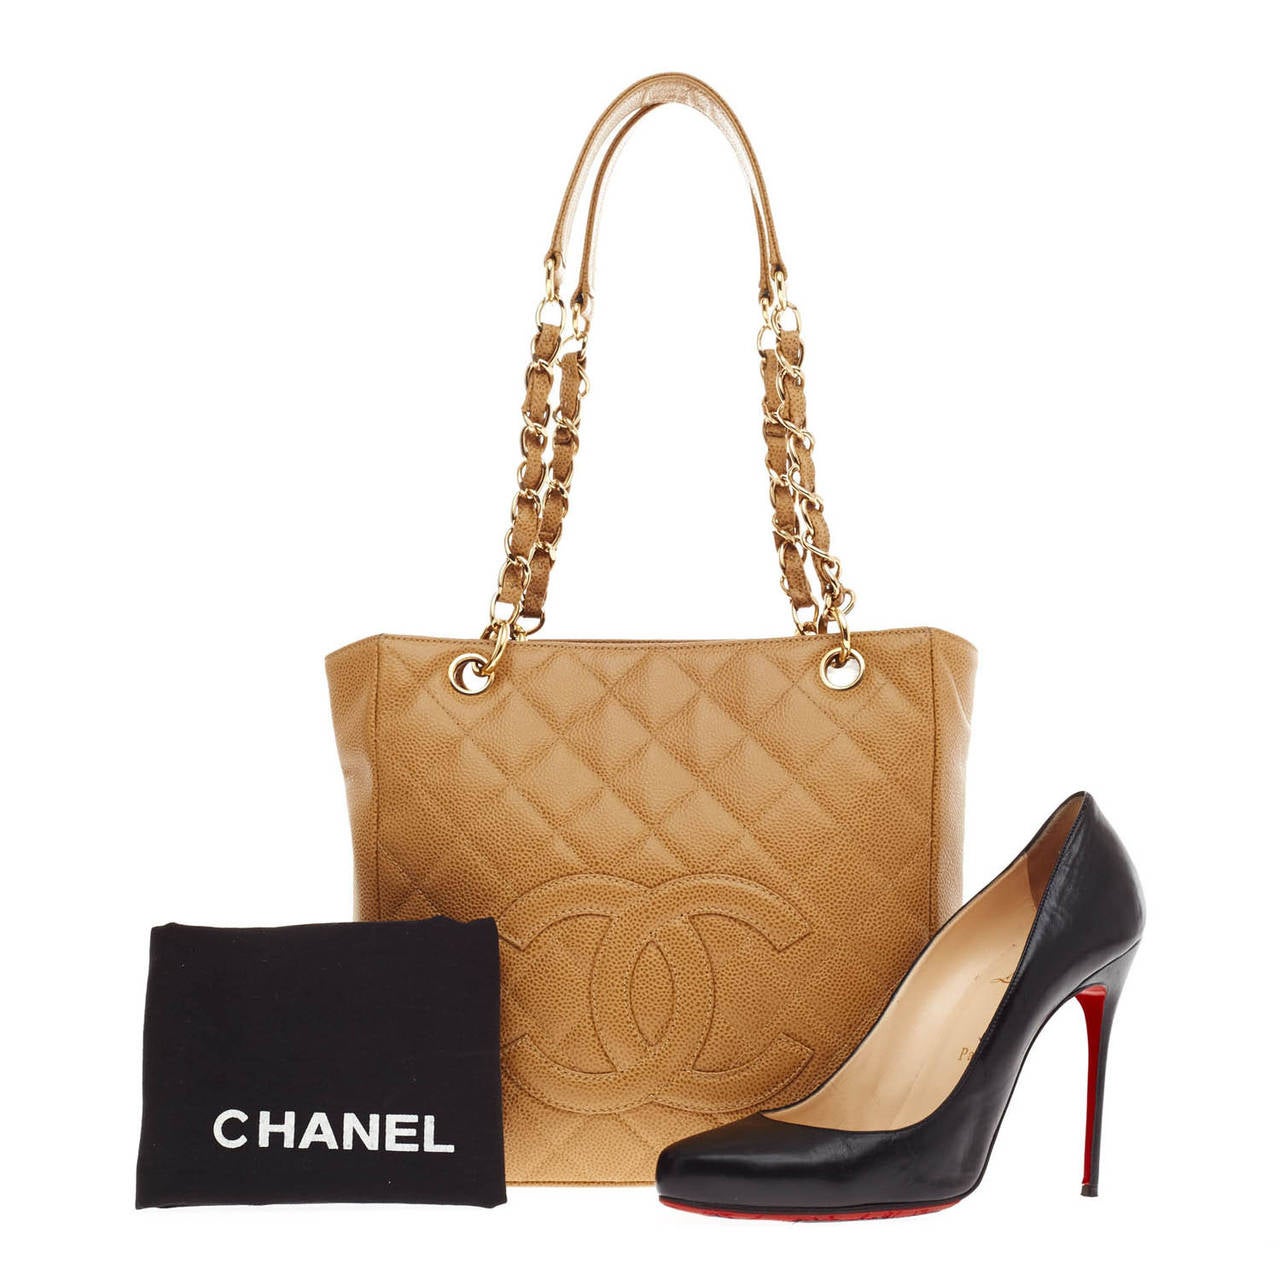 This authentic beautiful Chanel Petite Shopping Tote Caviar is the perfect bag that compliments any outfit in any season. This tan tote is accented with gold-tone hardware and has CC stitched in quilted caviar leather. The bag features dual quilted